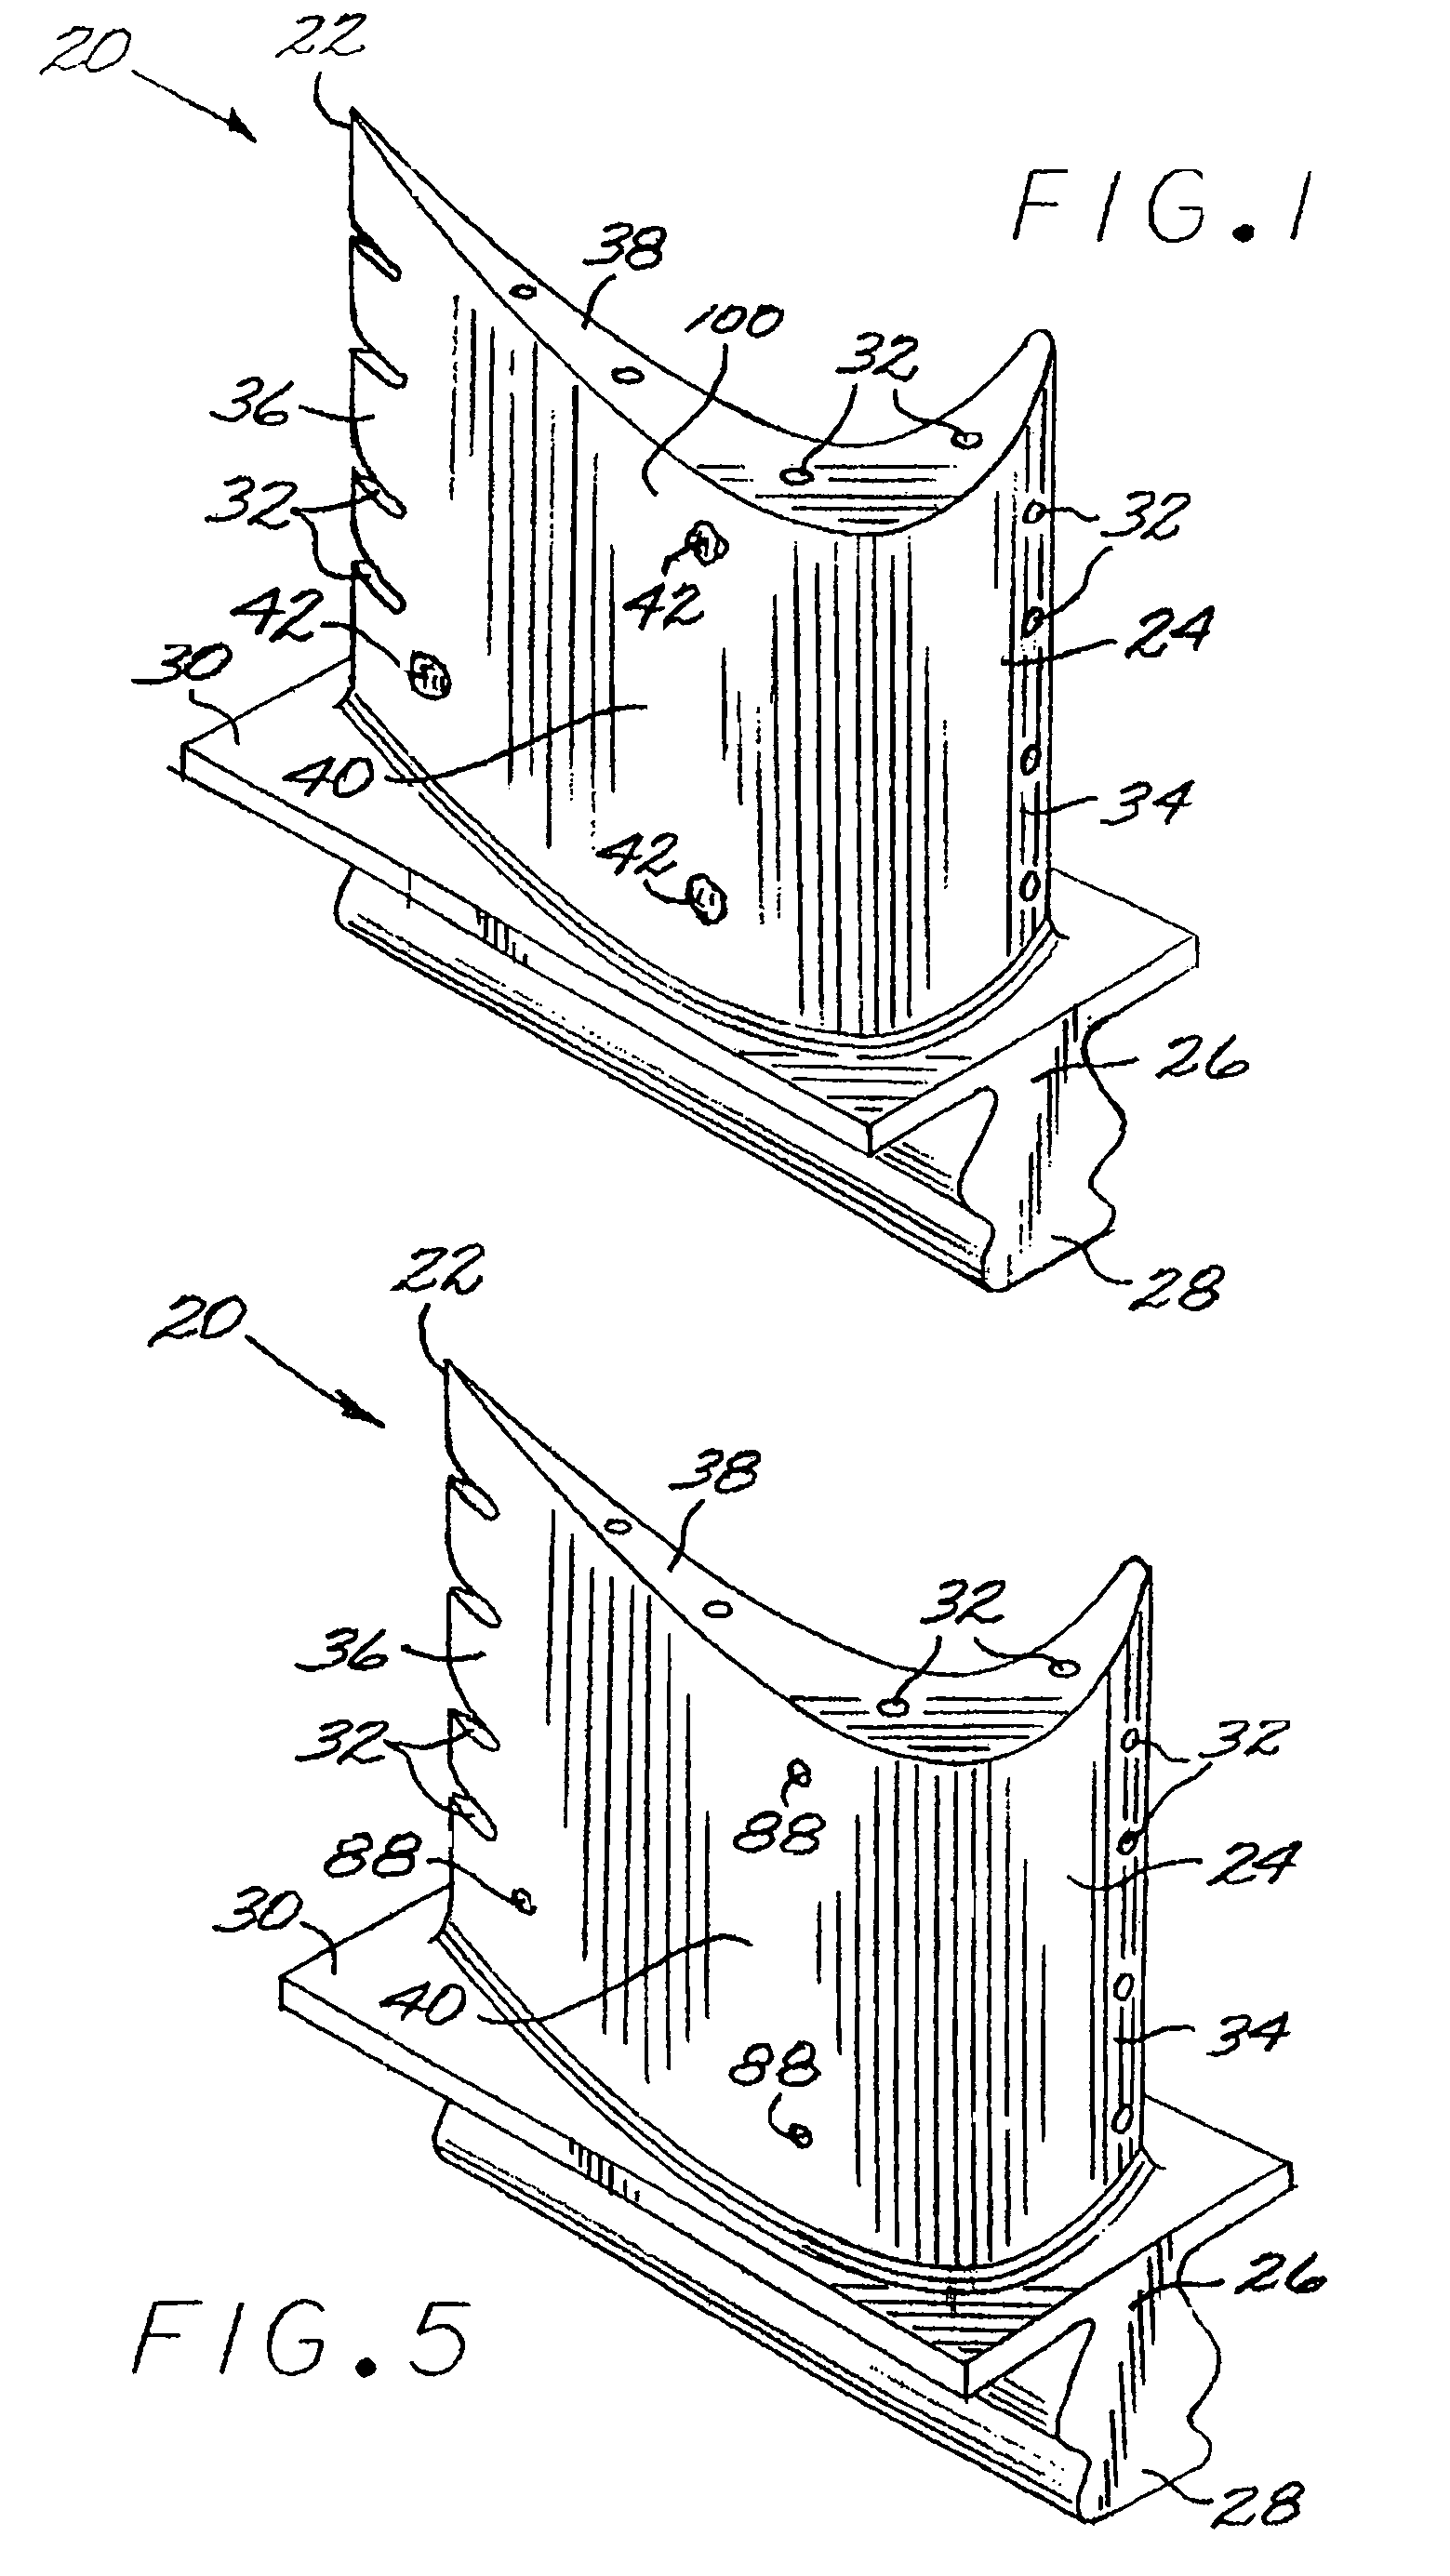 Weld closure of through-holes in a nickel-base superalloy hollow airfoil